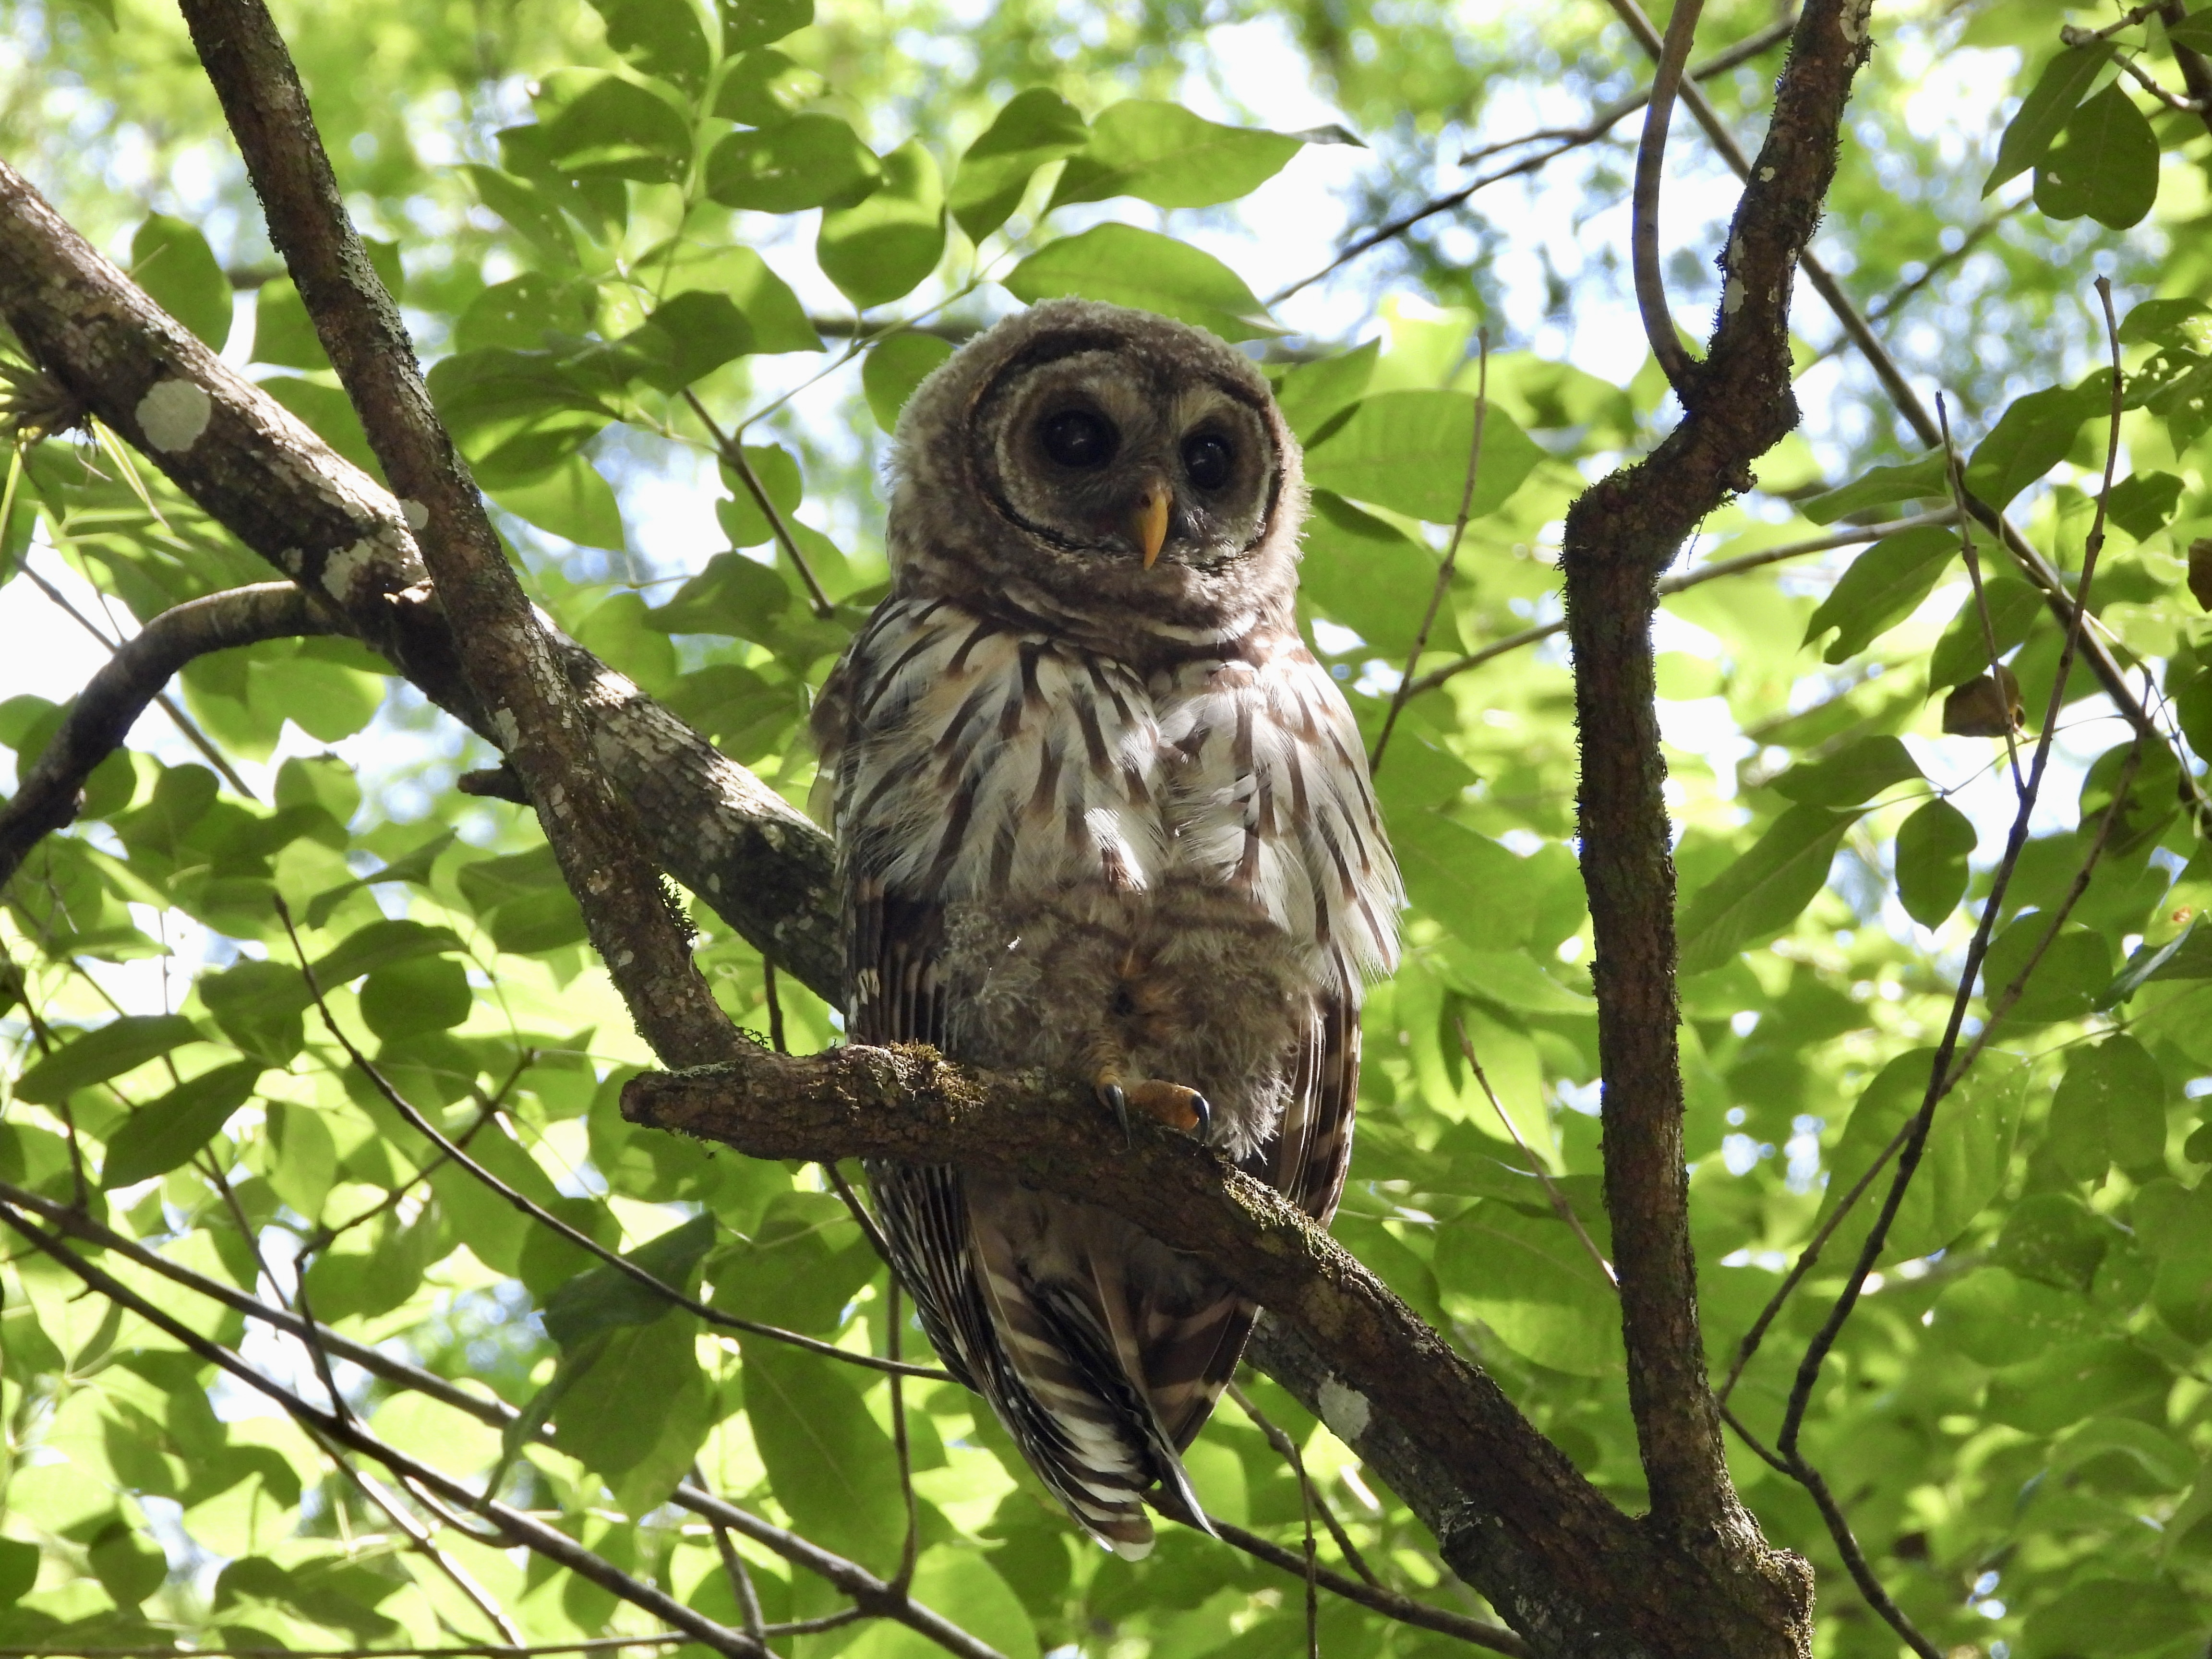 Barred owl in a tree.